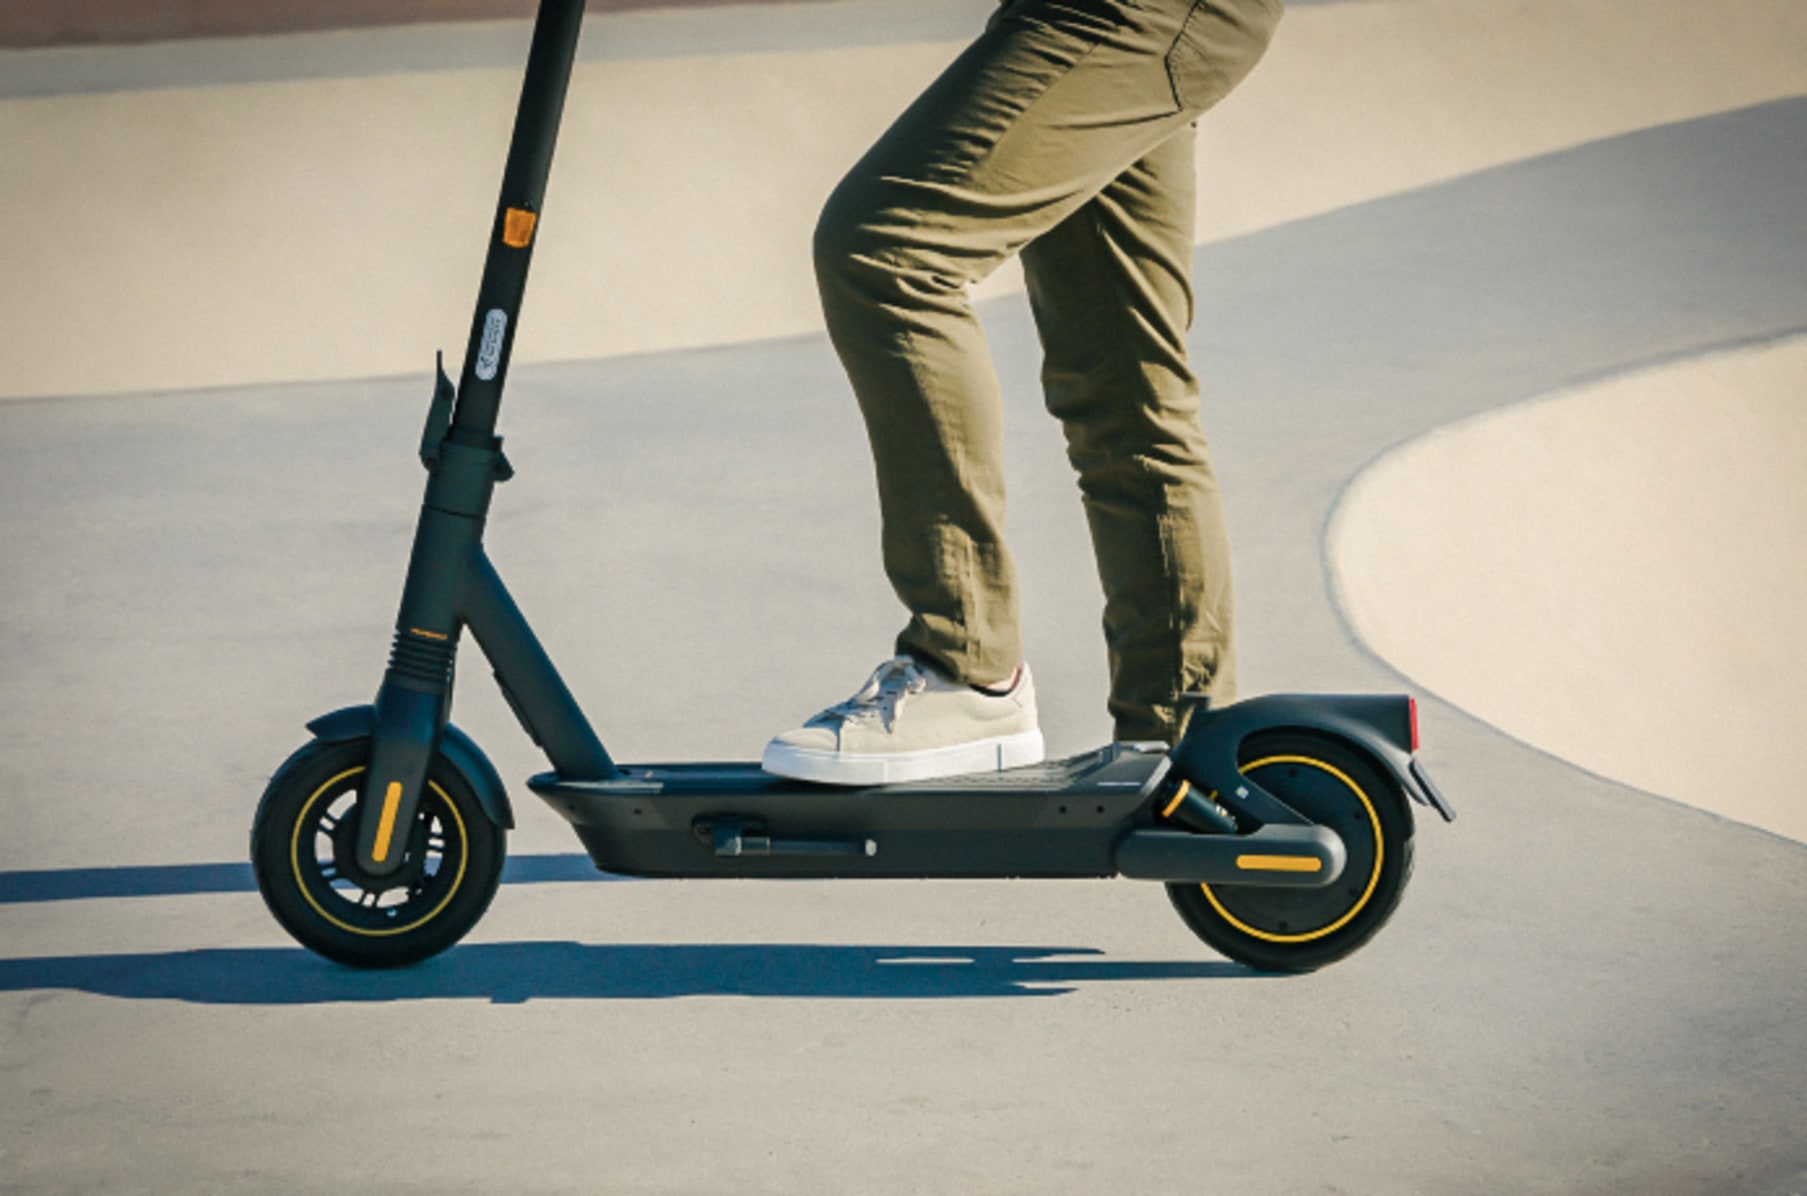 Segway Ninebot Max G2 Review - Does the new Max deliver?